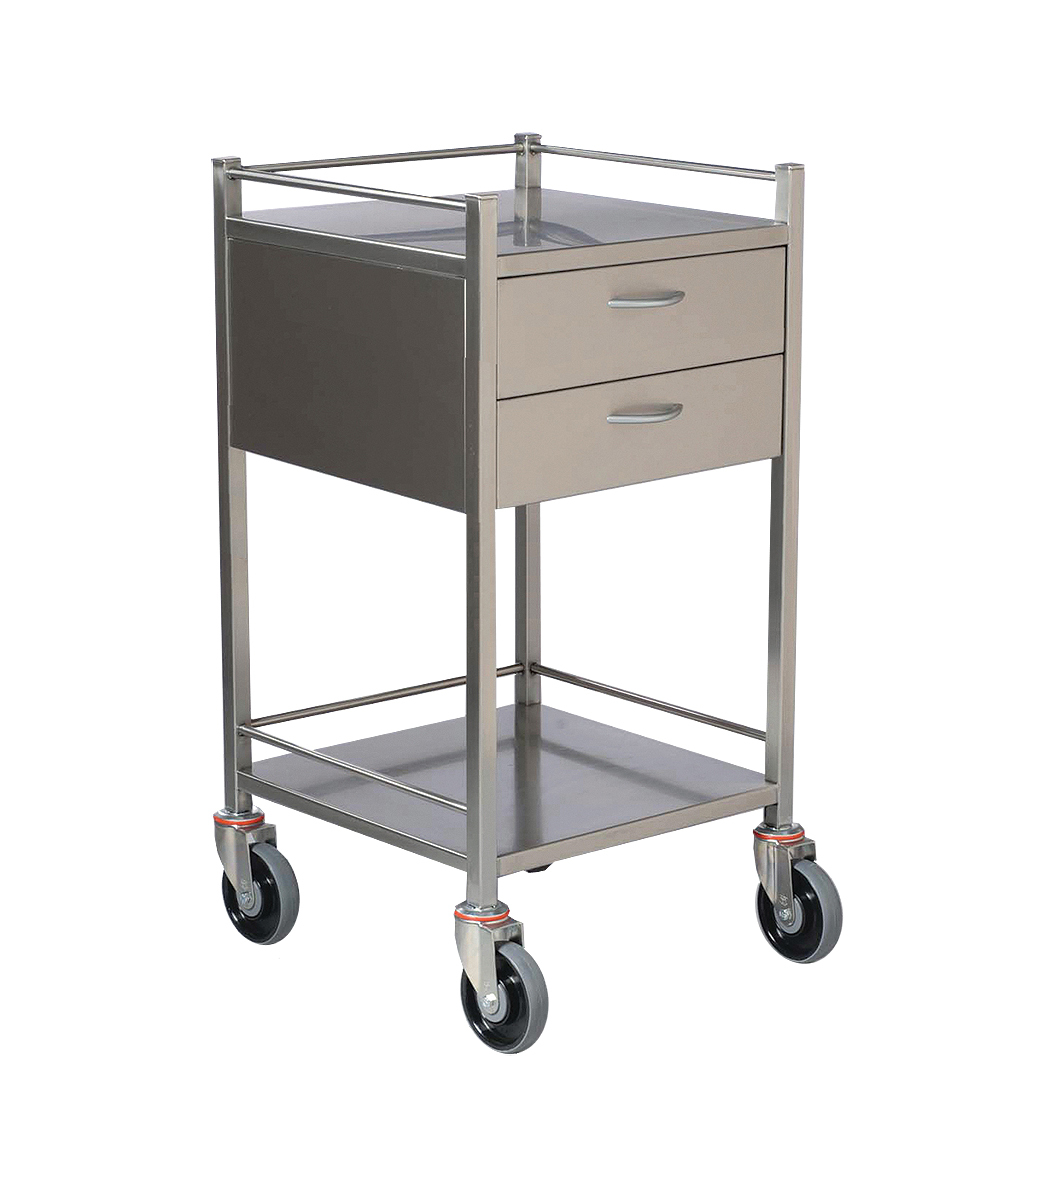 Stainless Steel Dressing Clinicart Trolley Instrument - 2 Drawer - 900 x 490mm